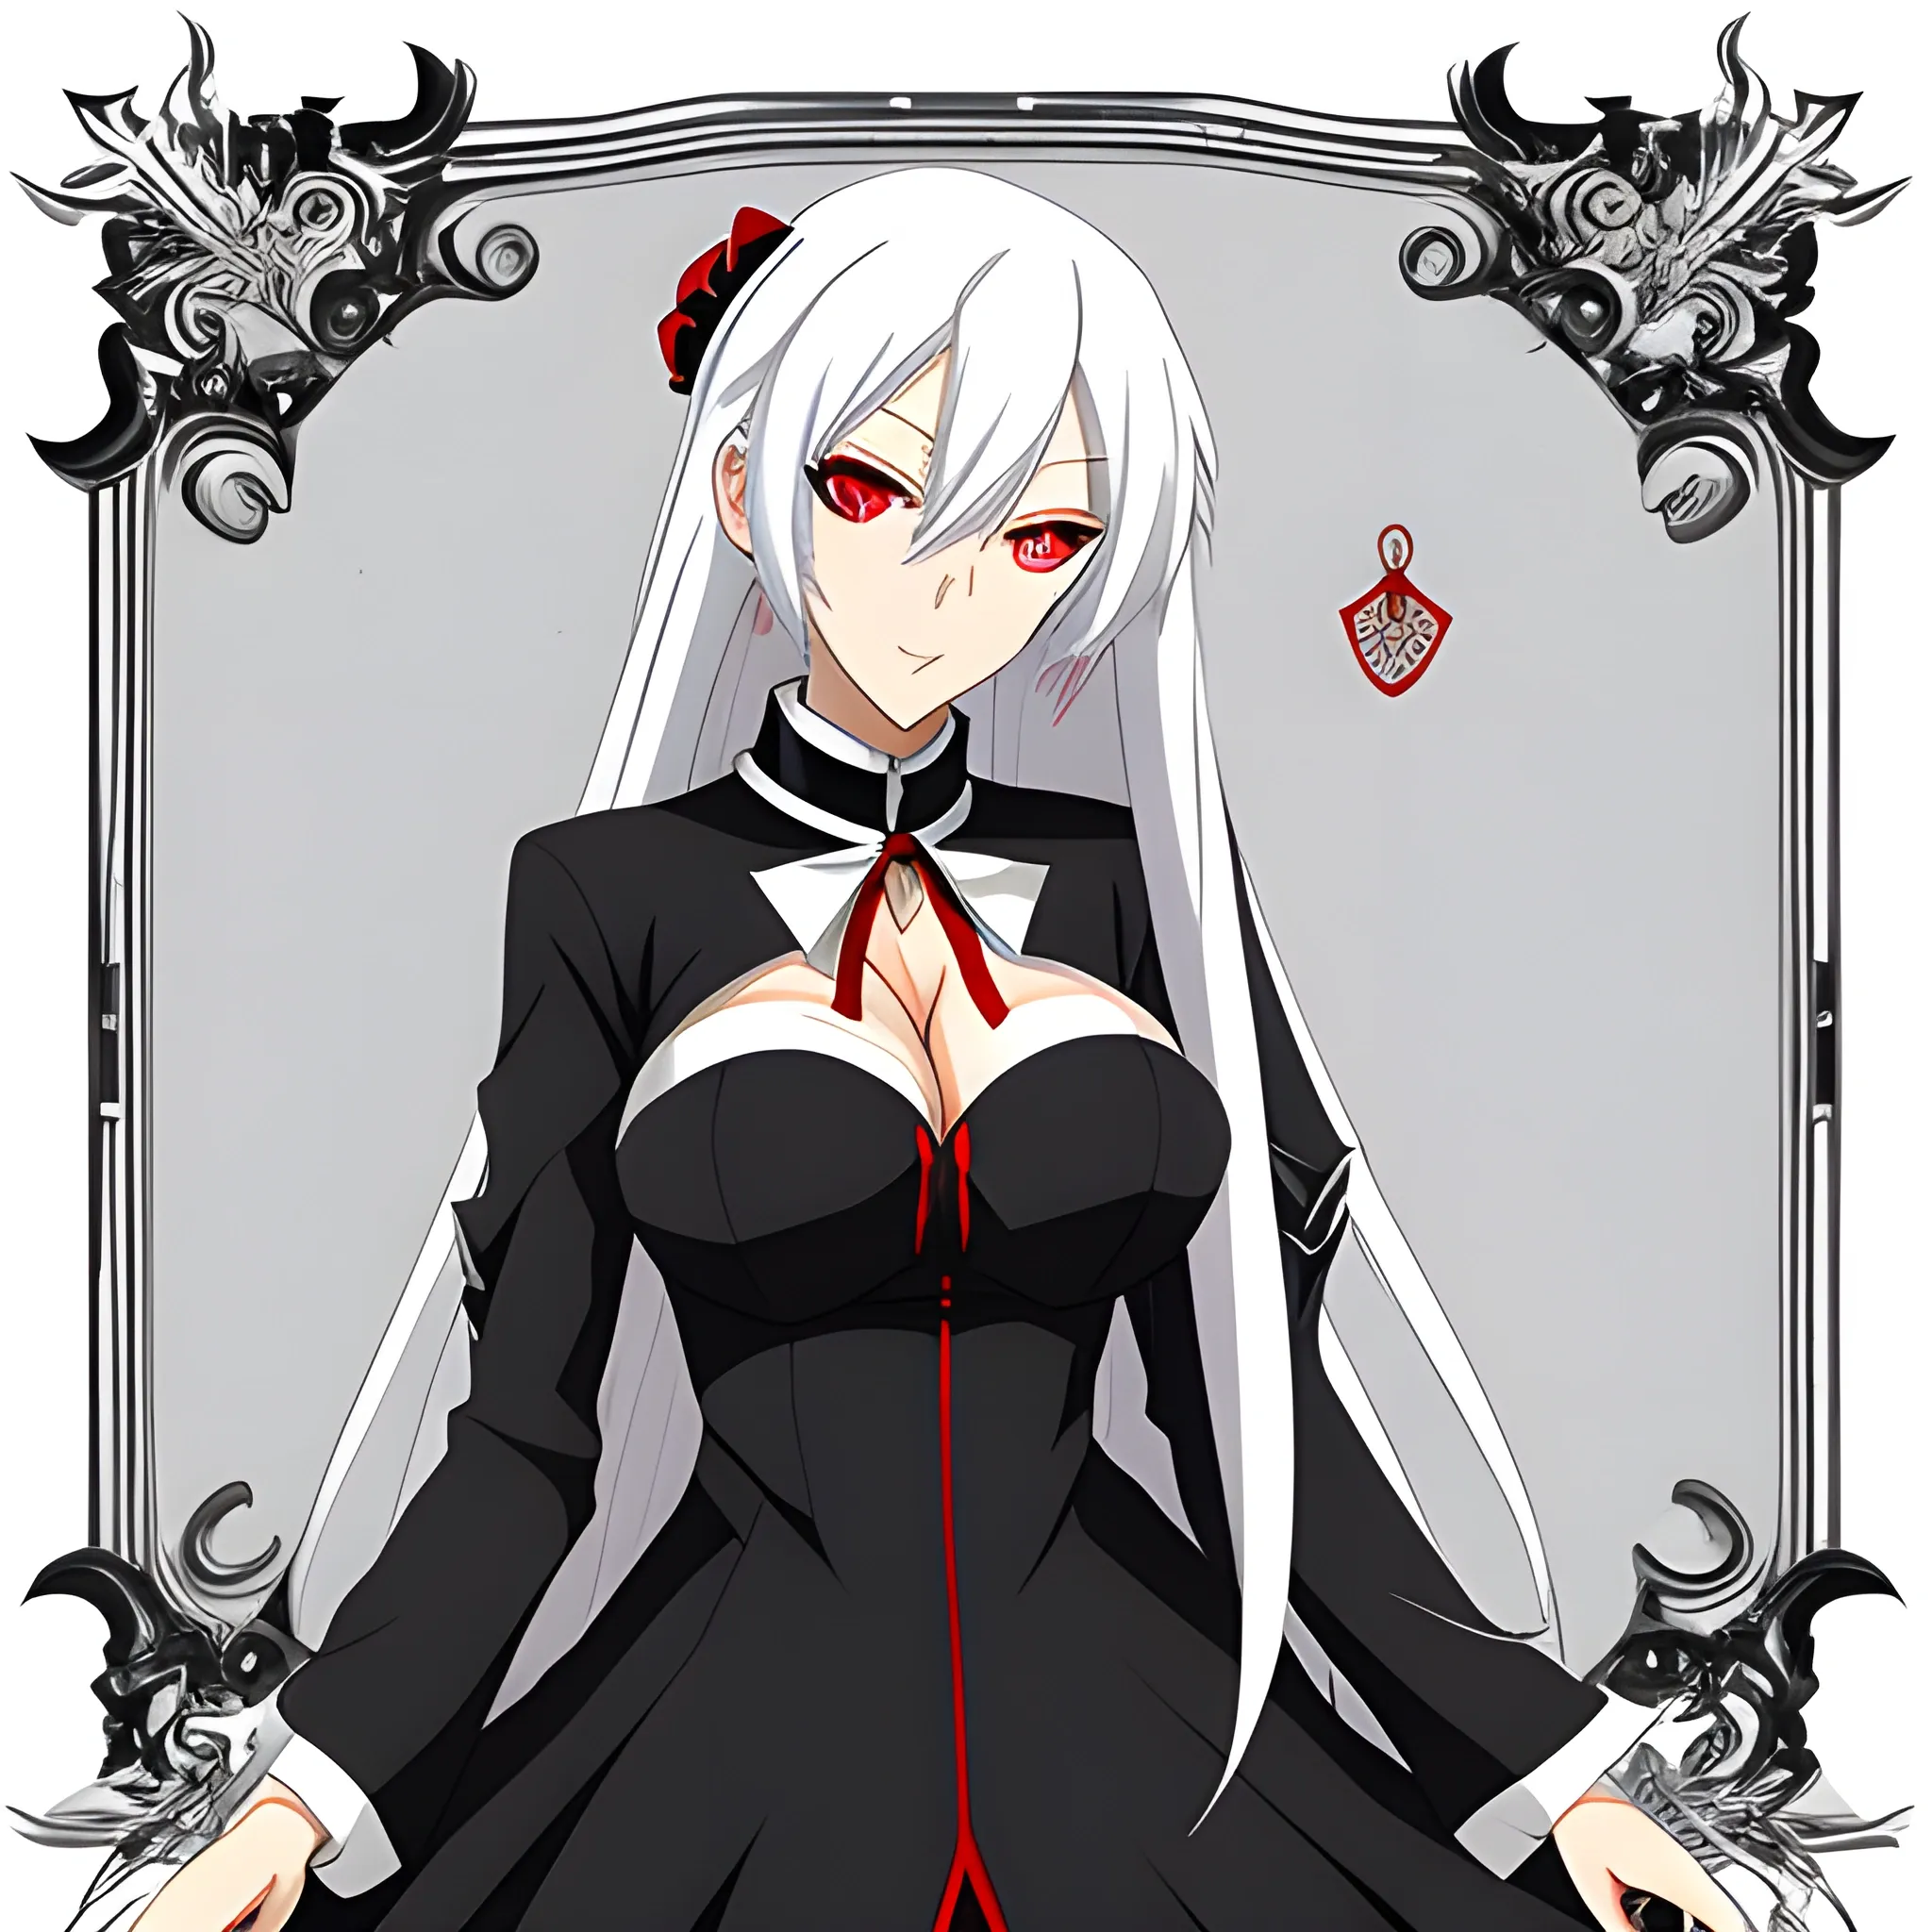 An anime girl who looks in her mid 20's, with long white hair, red eyes, and a black collar with a padlock on the front of it. Wearing an elegant white dress.